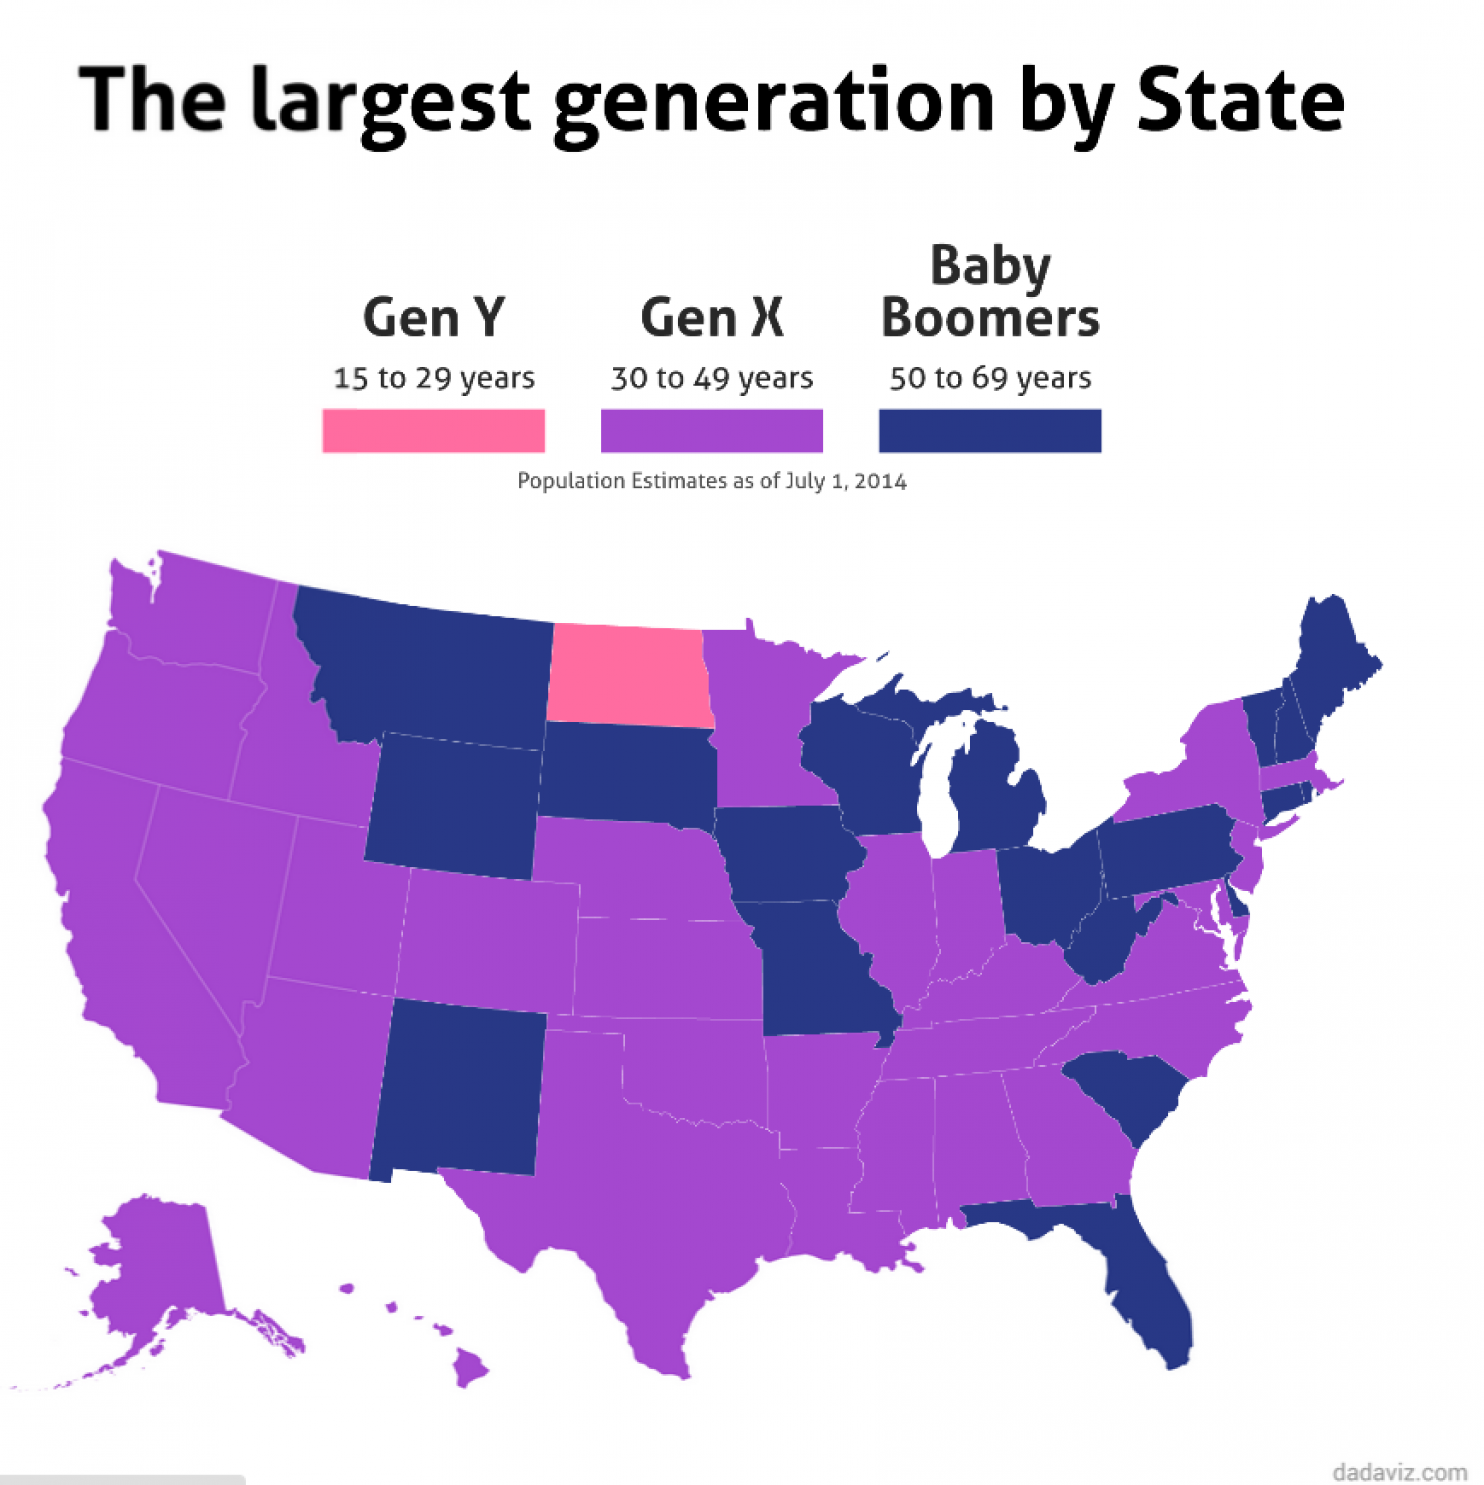 most populous states